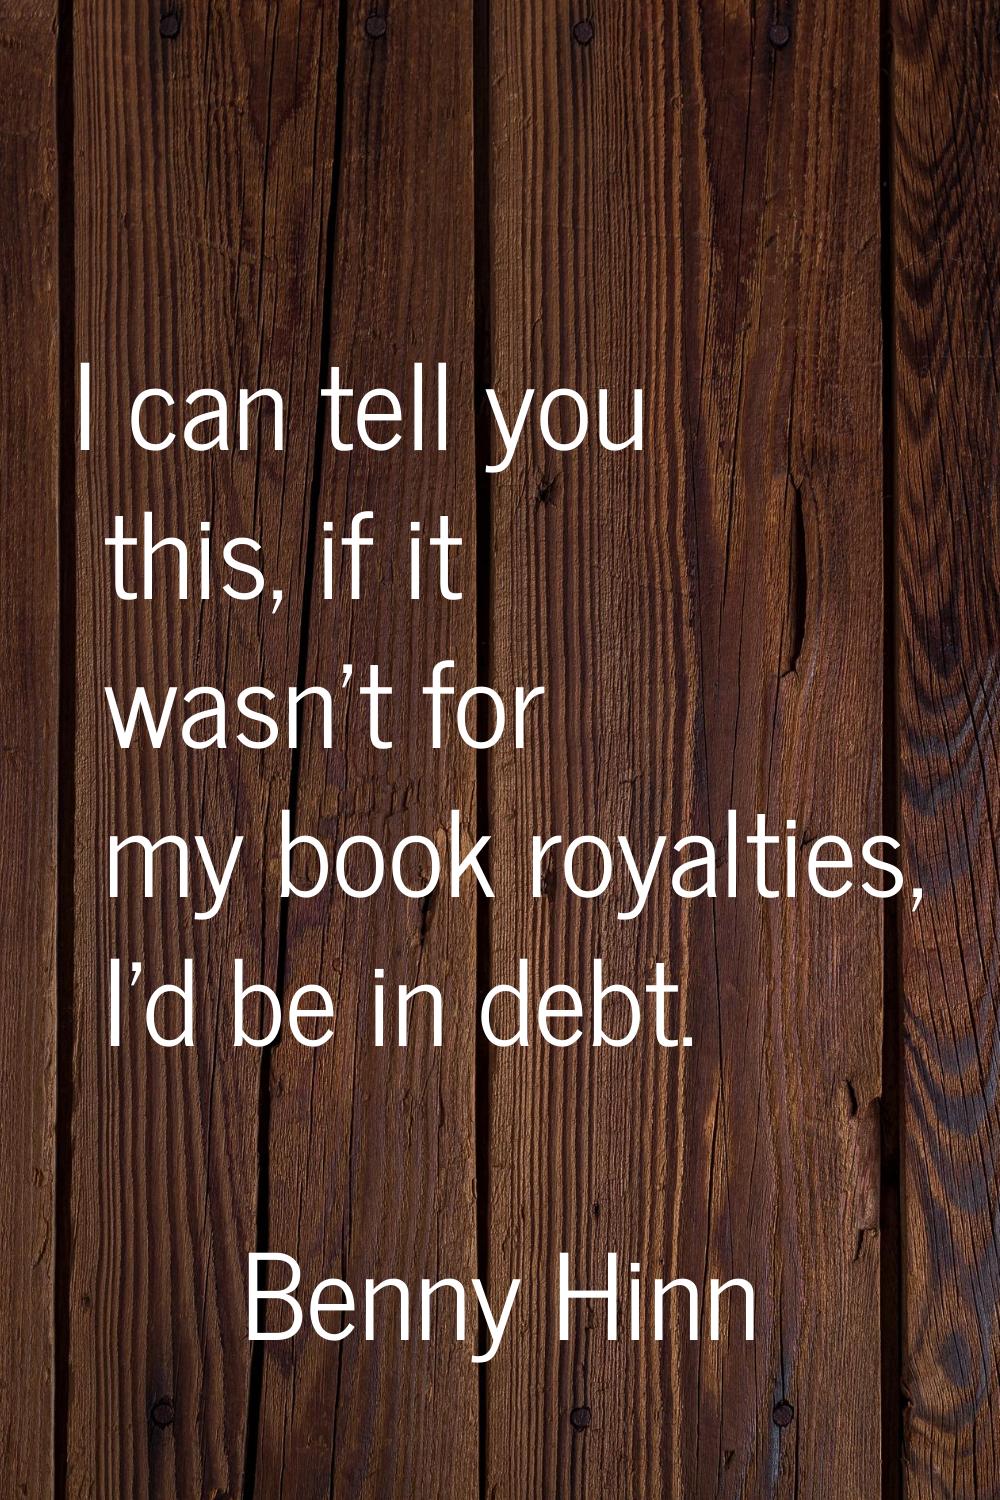 I can tell you this, if it wasn't for my book royalties, I'd be in debt.